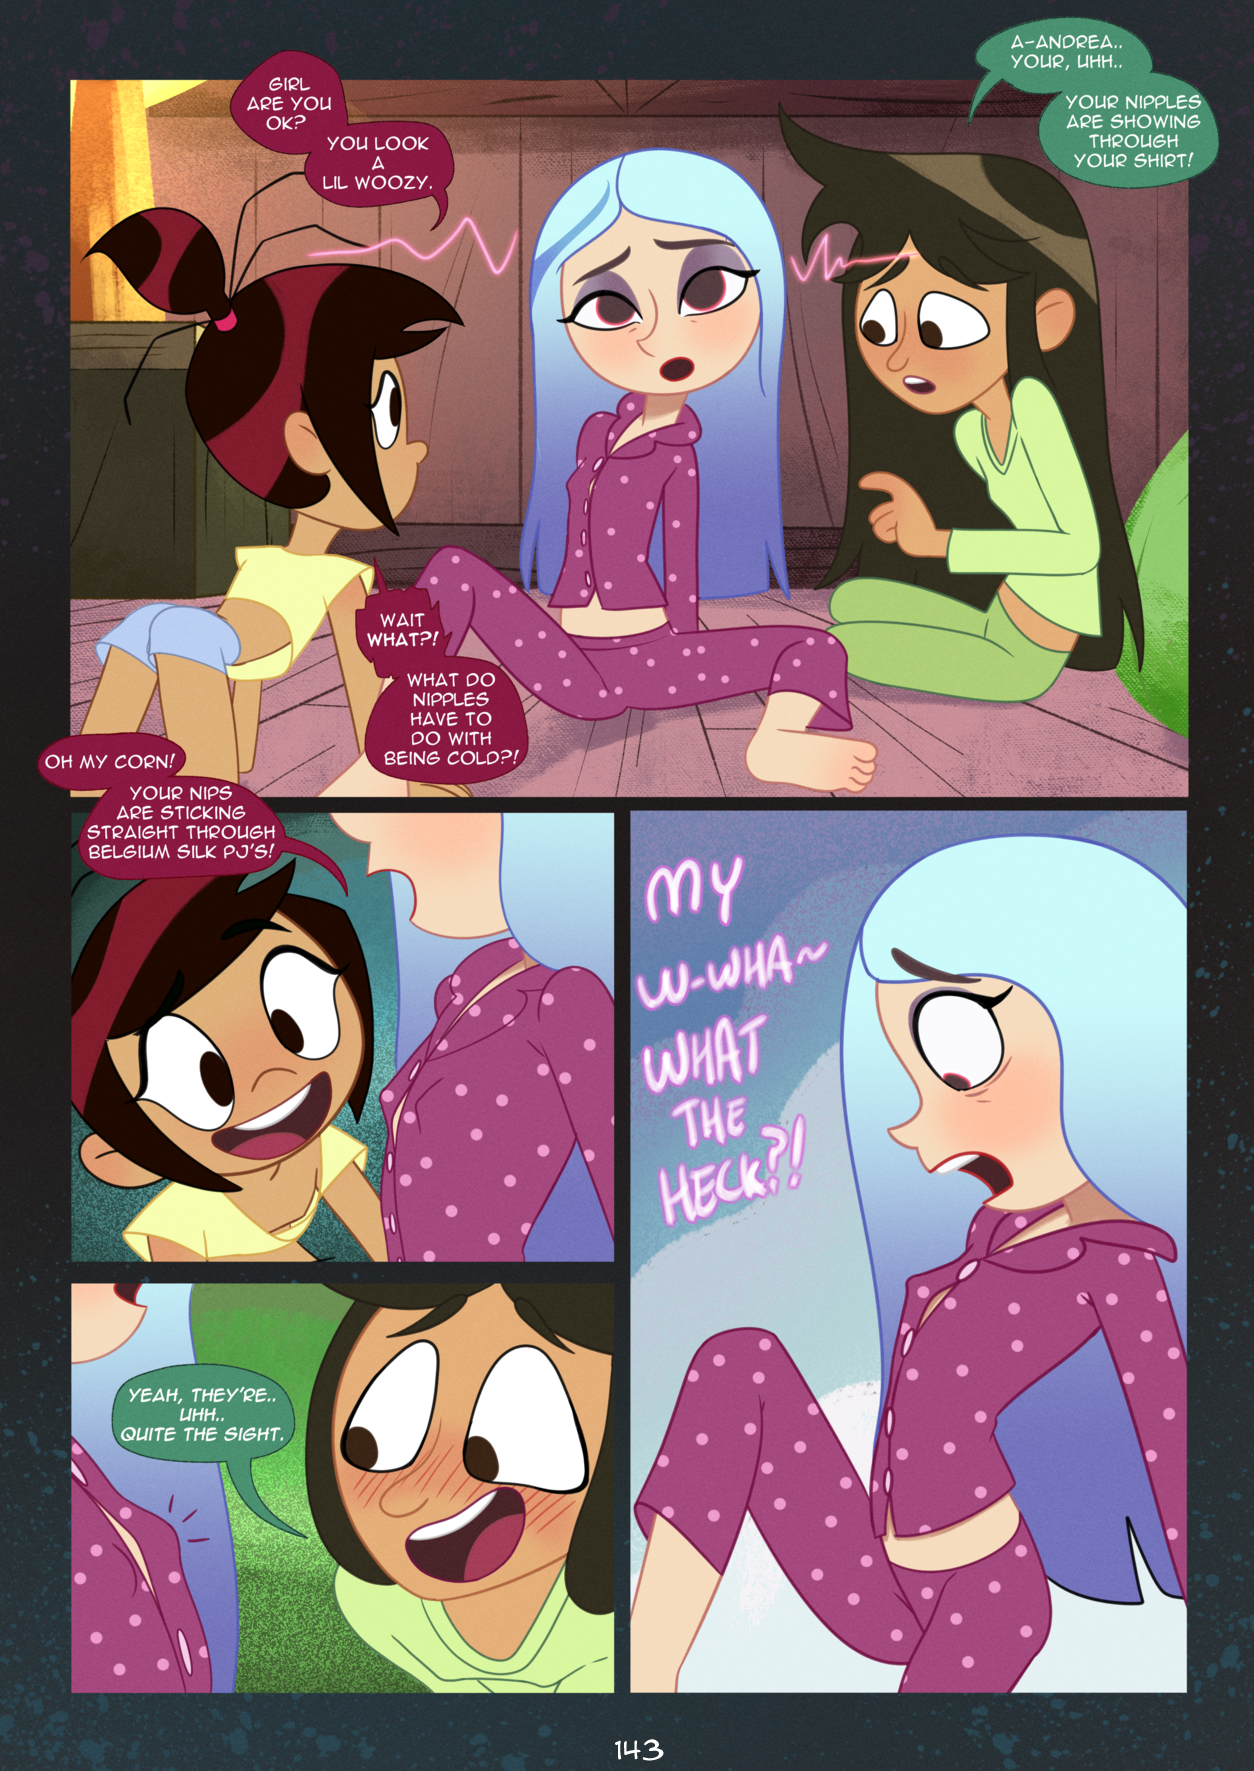 Girls SleepOver - Gone Wrong (Gone Sexual) porn comic picture 5